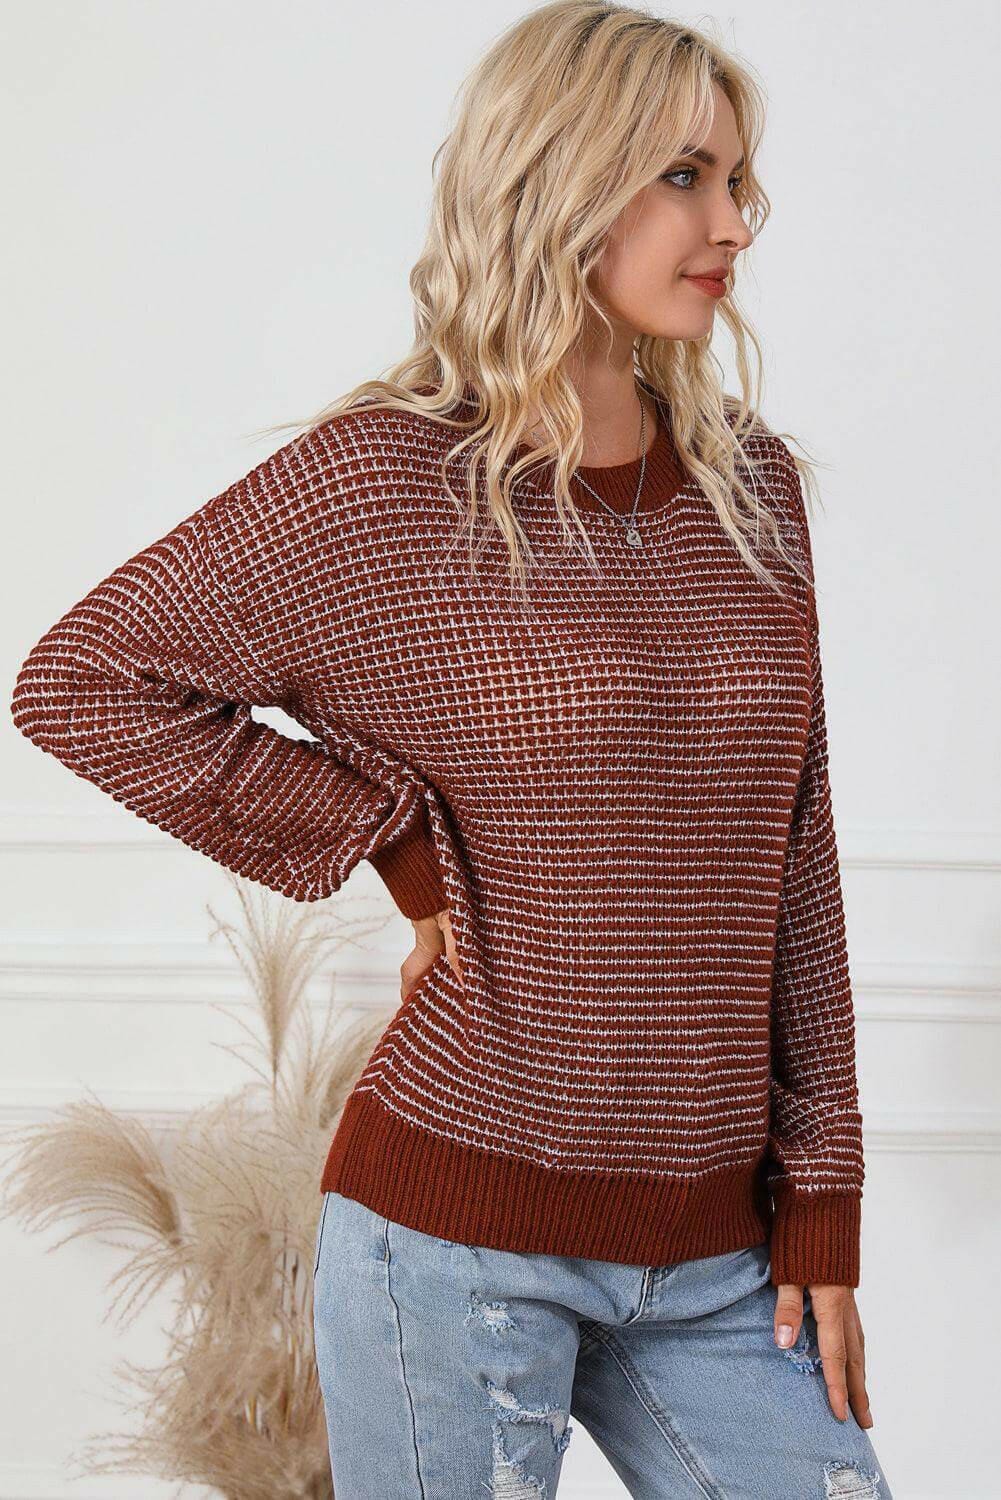 Heathered Marley Style Sweater with Puff Sleeves and Drop Shoulder